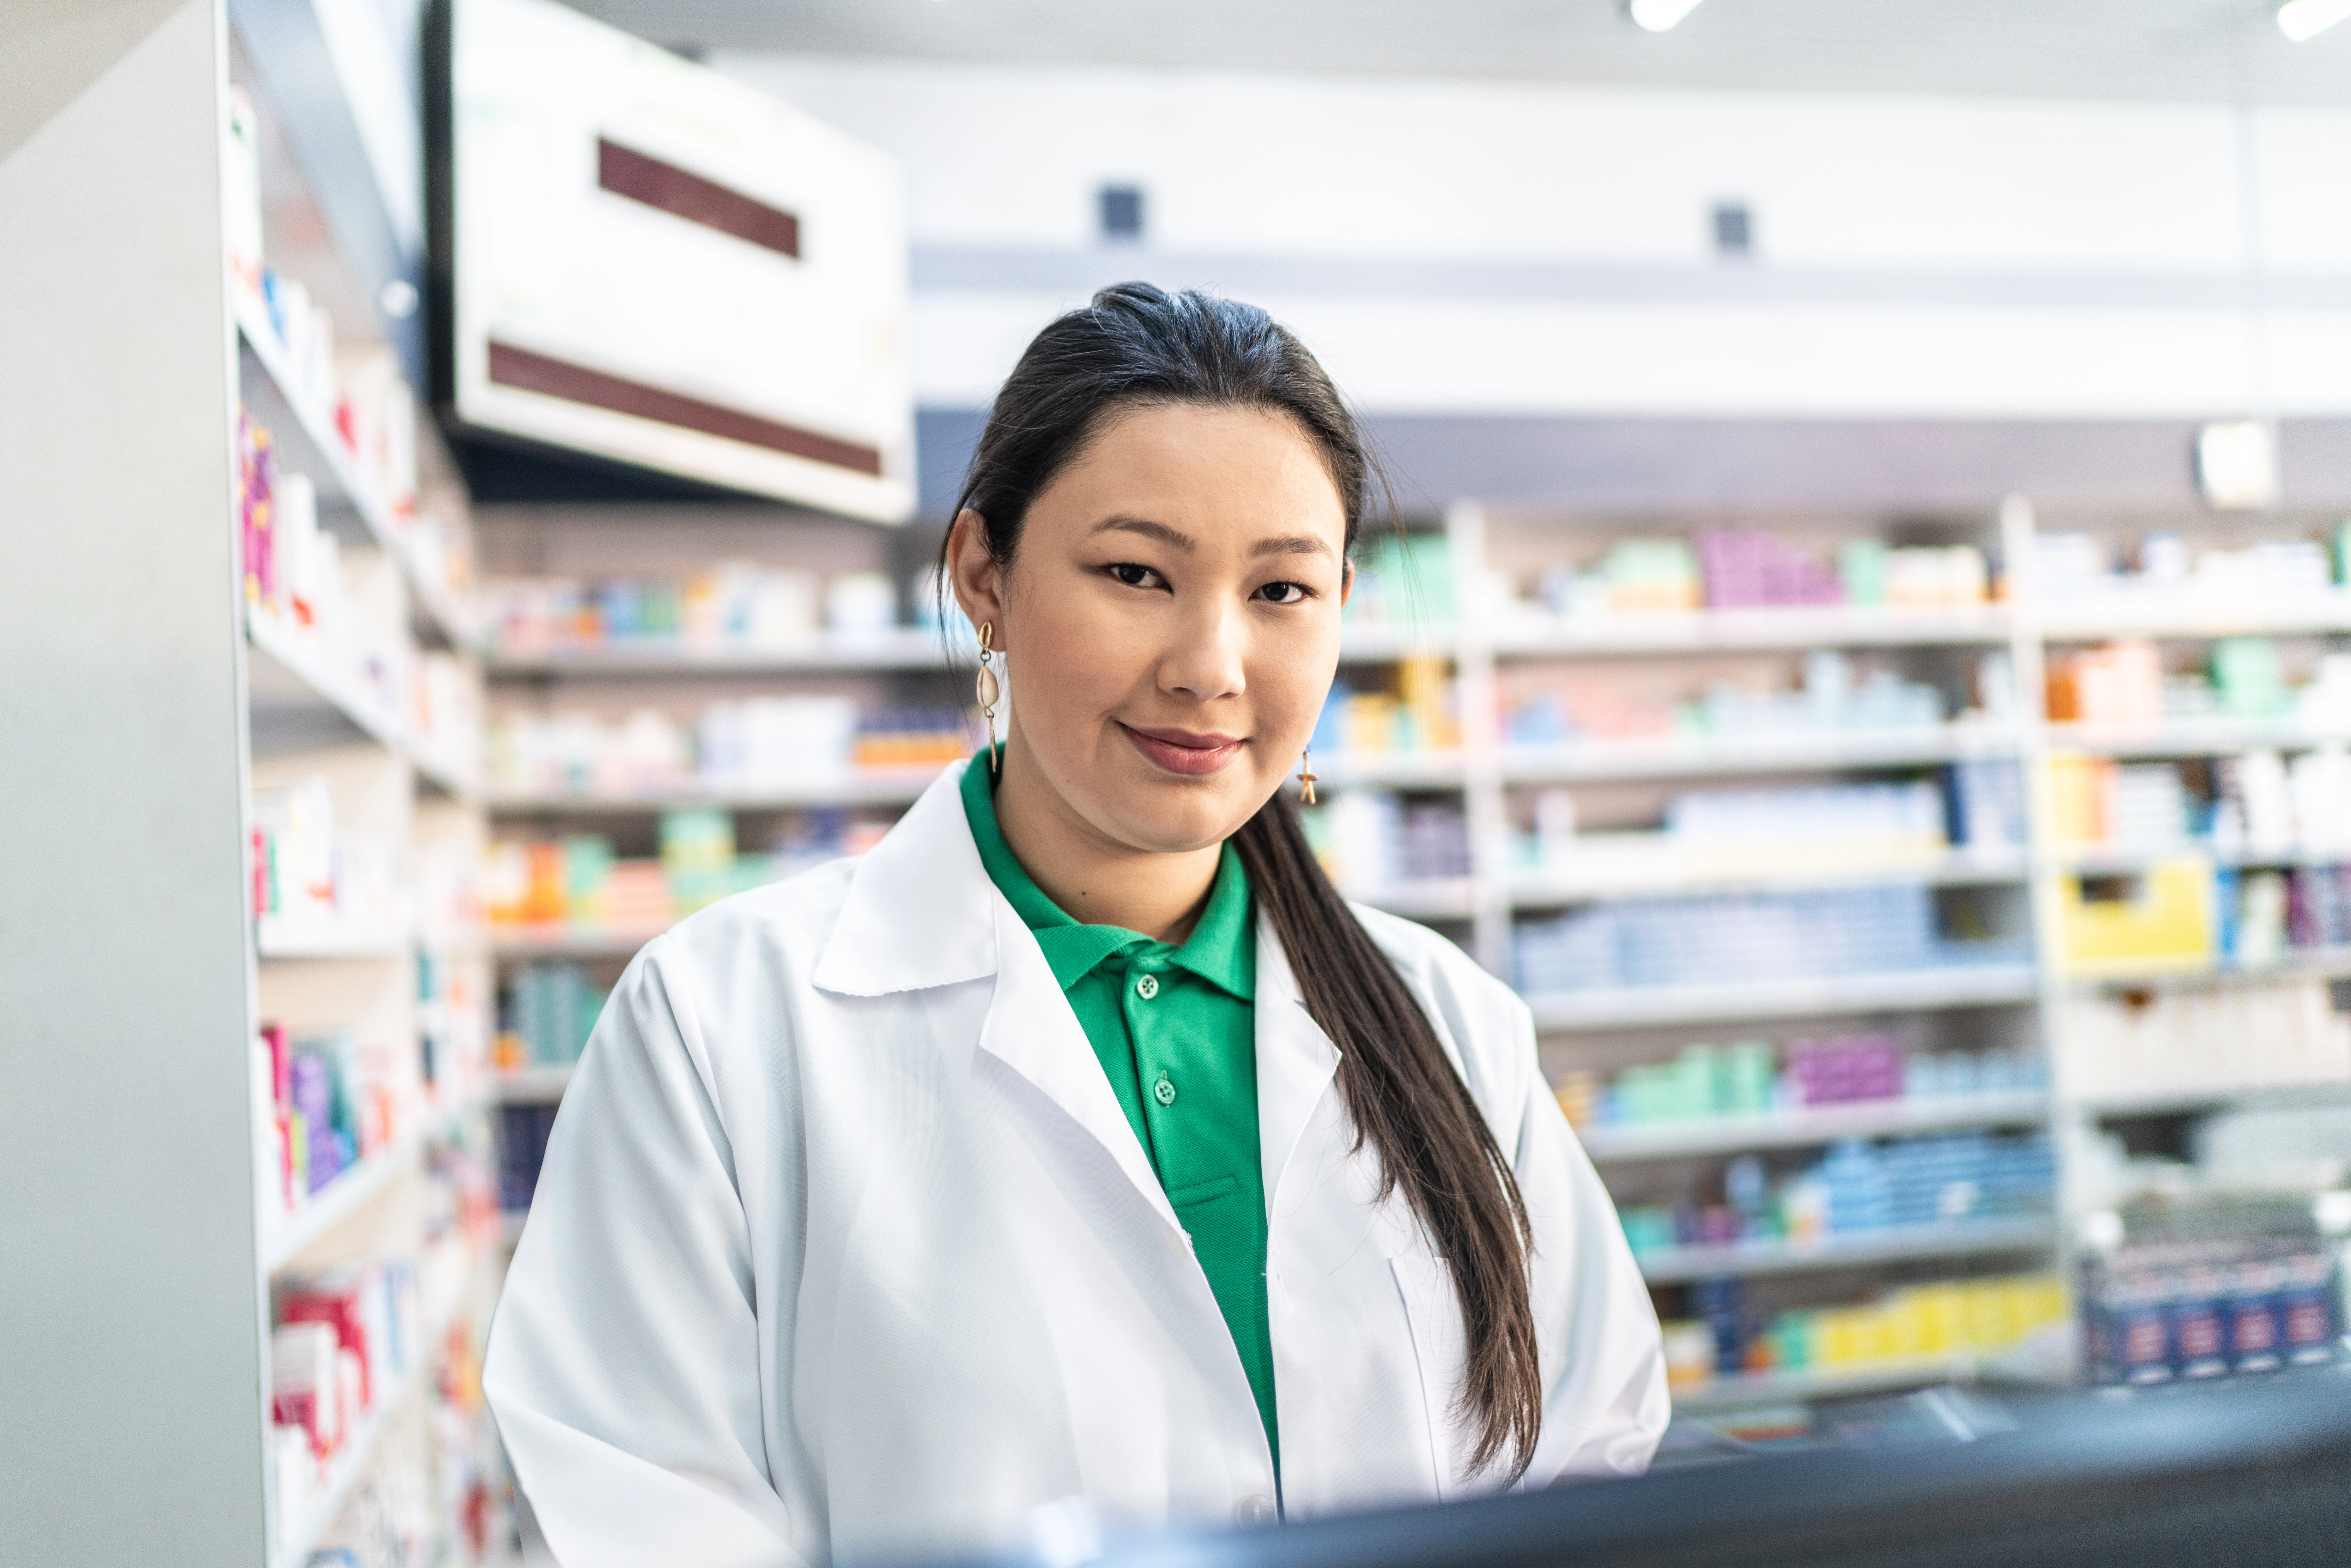 Portrait of young female pharmacist using computer at pharmacy